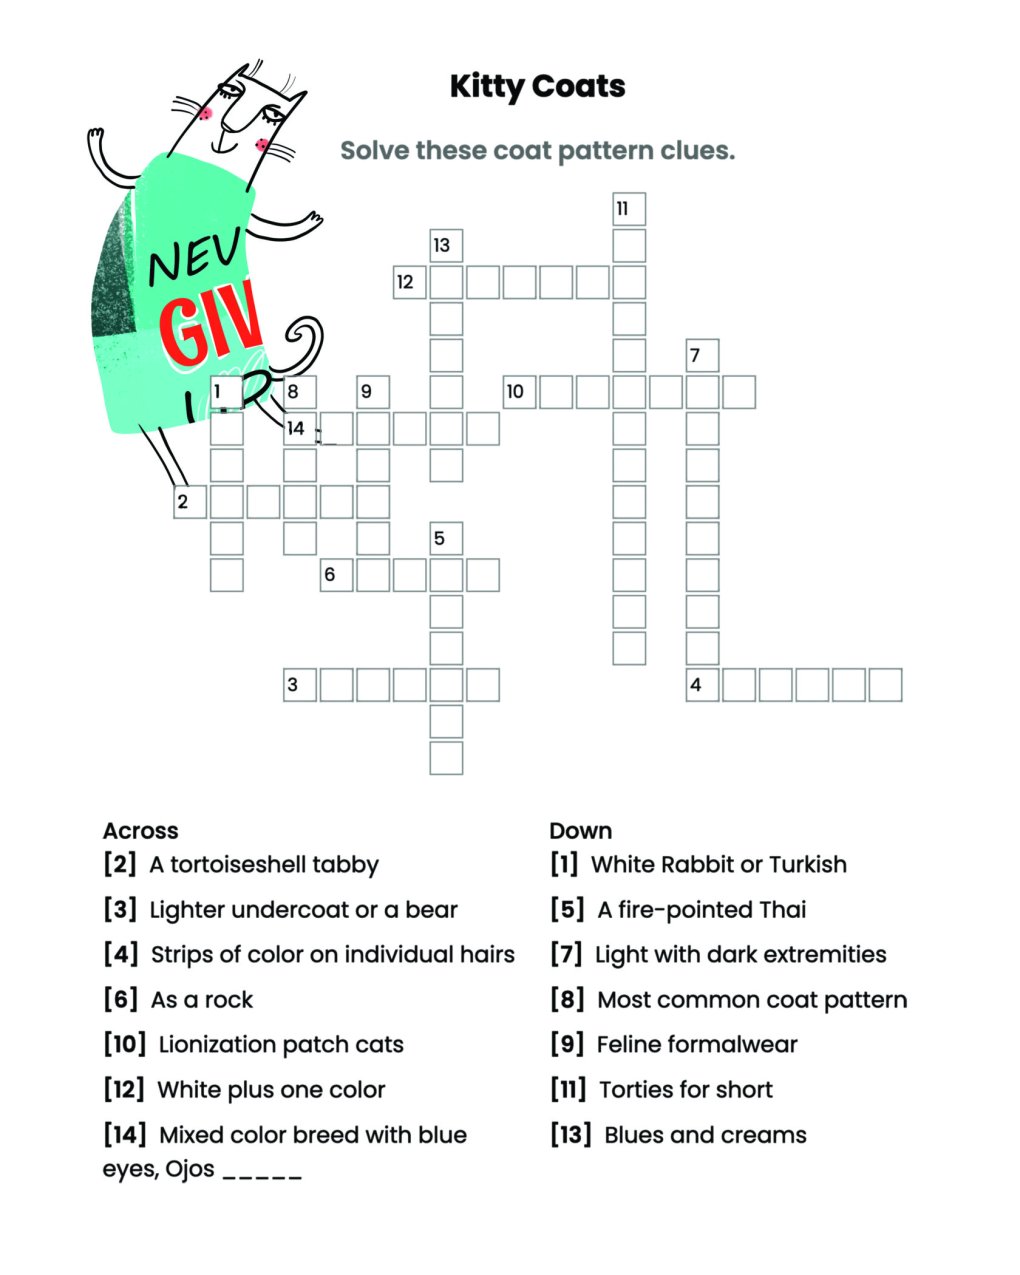 Weekly Cat Word Puzzle – Coat Pattern Clues